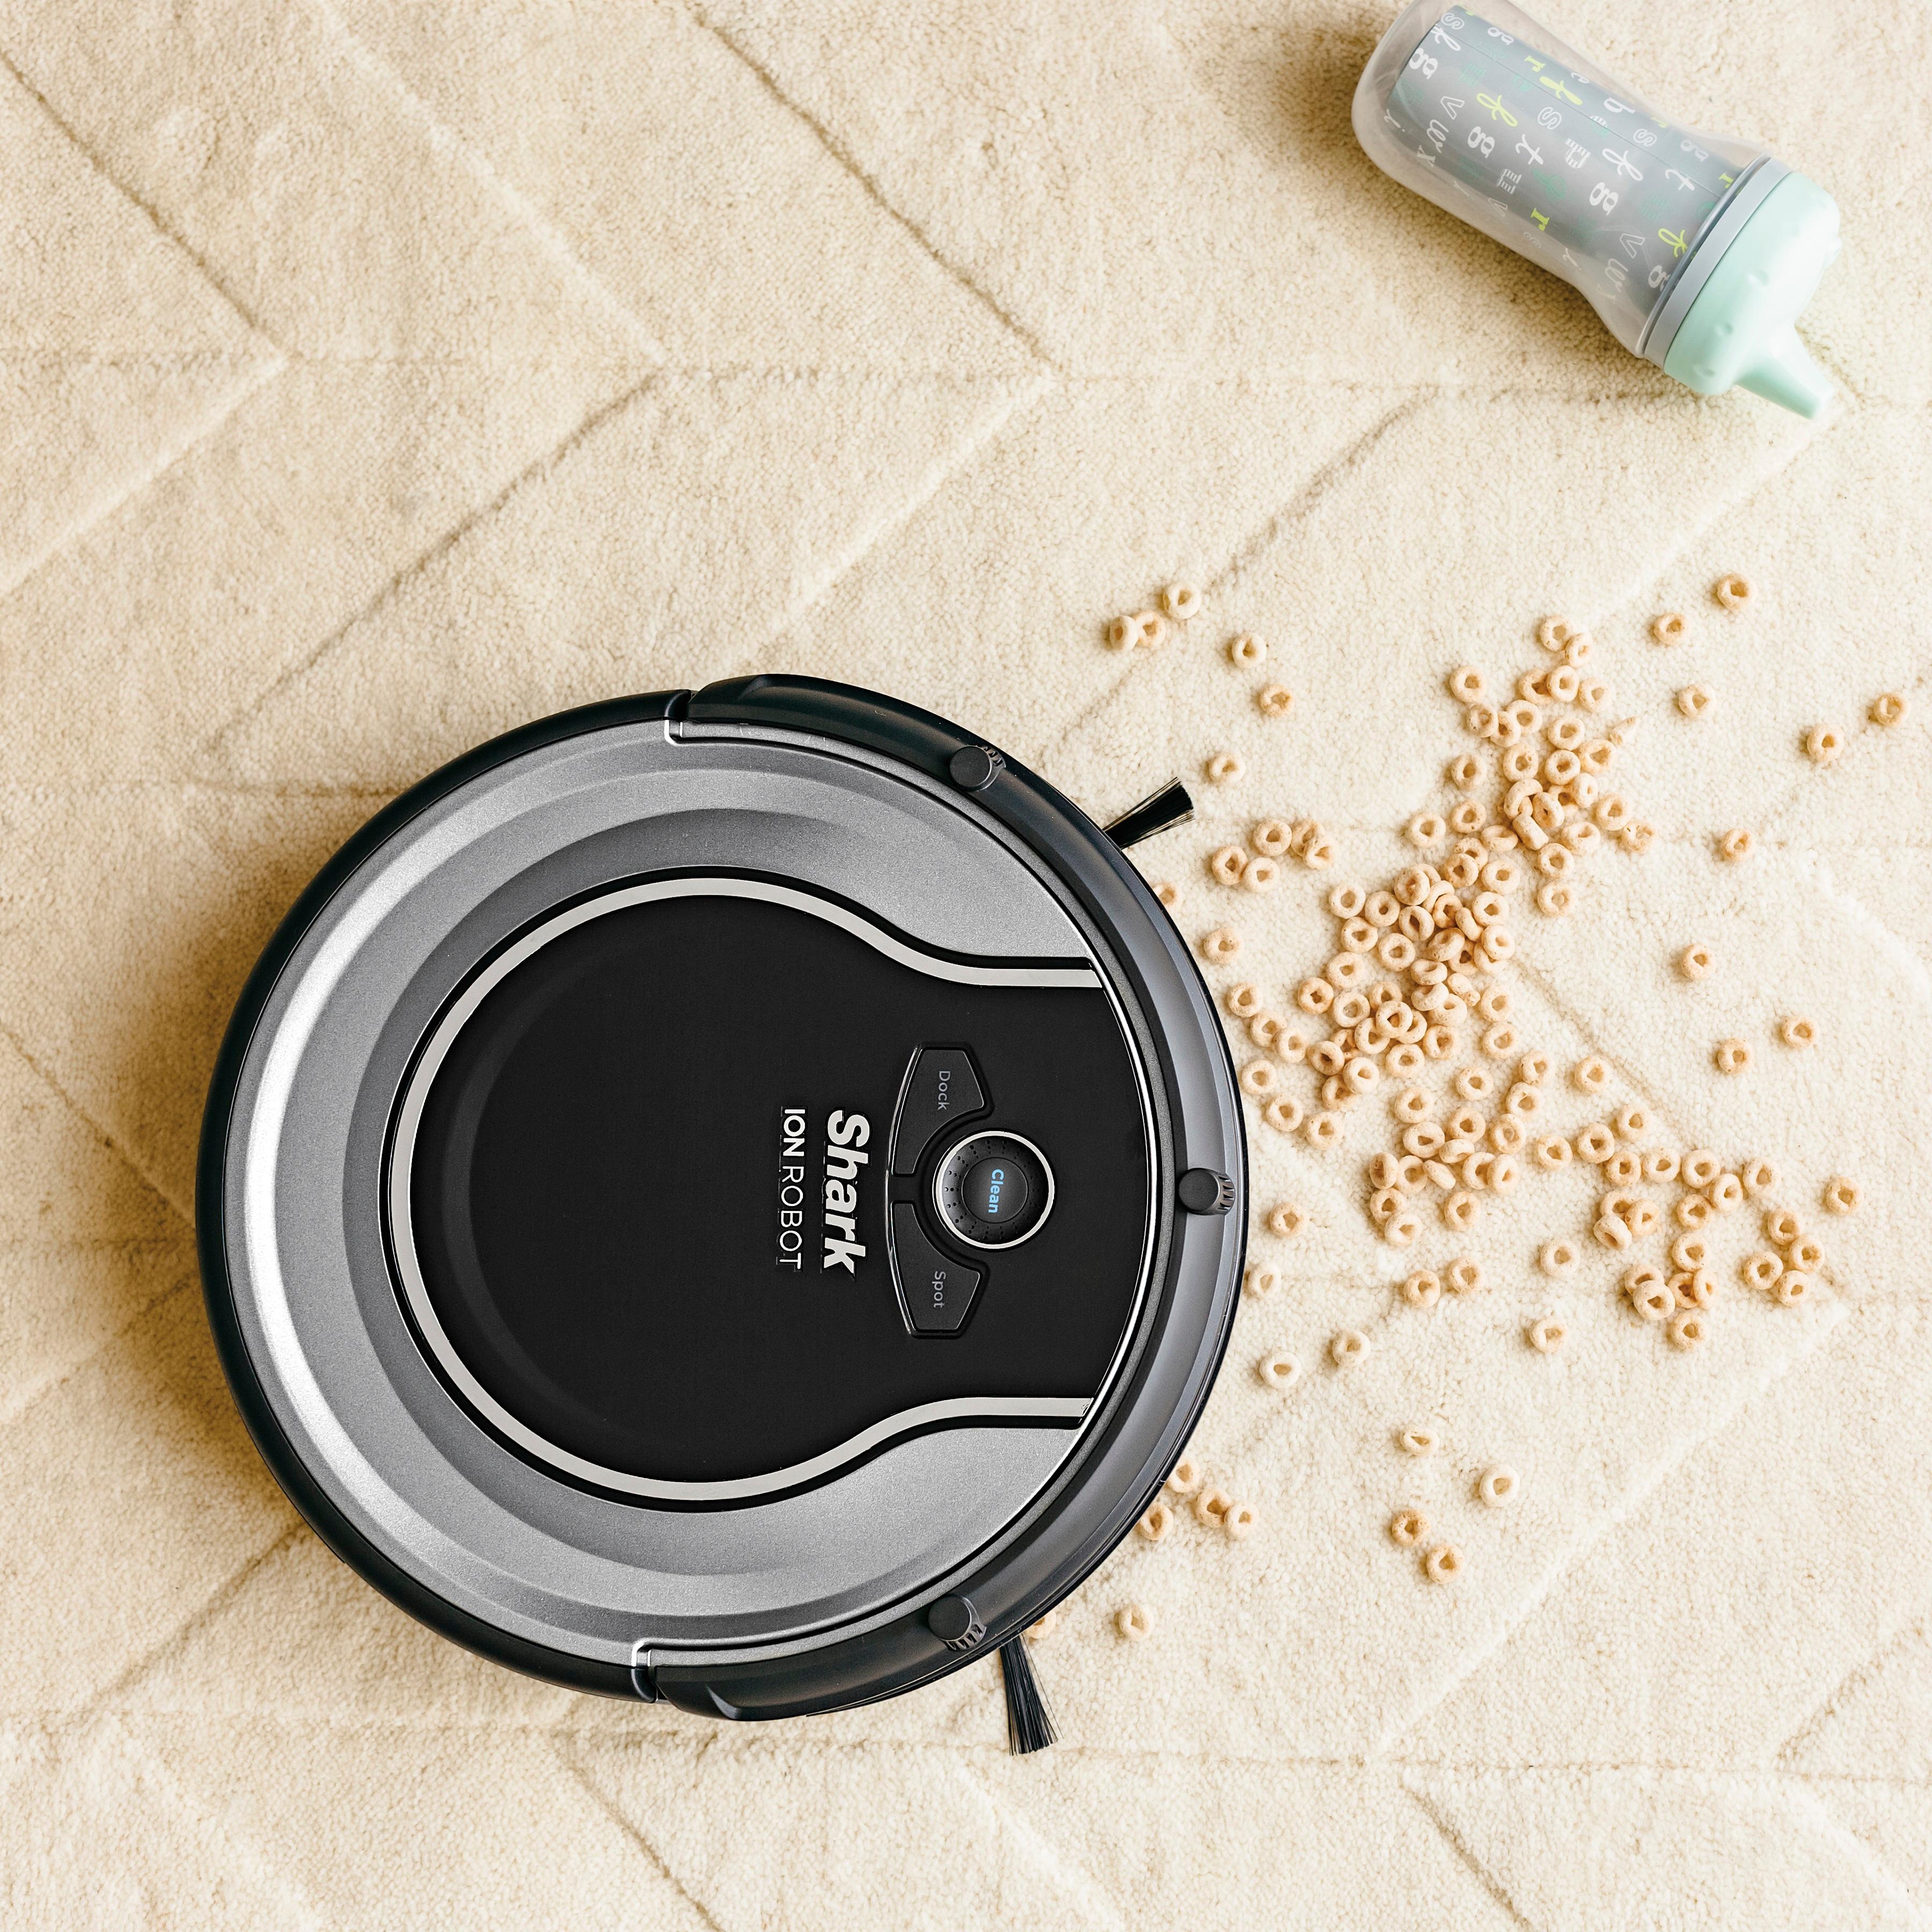 Shark ION 720 Silver Robot Vacuum Cleaner for sale online 